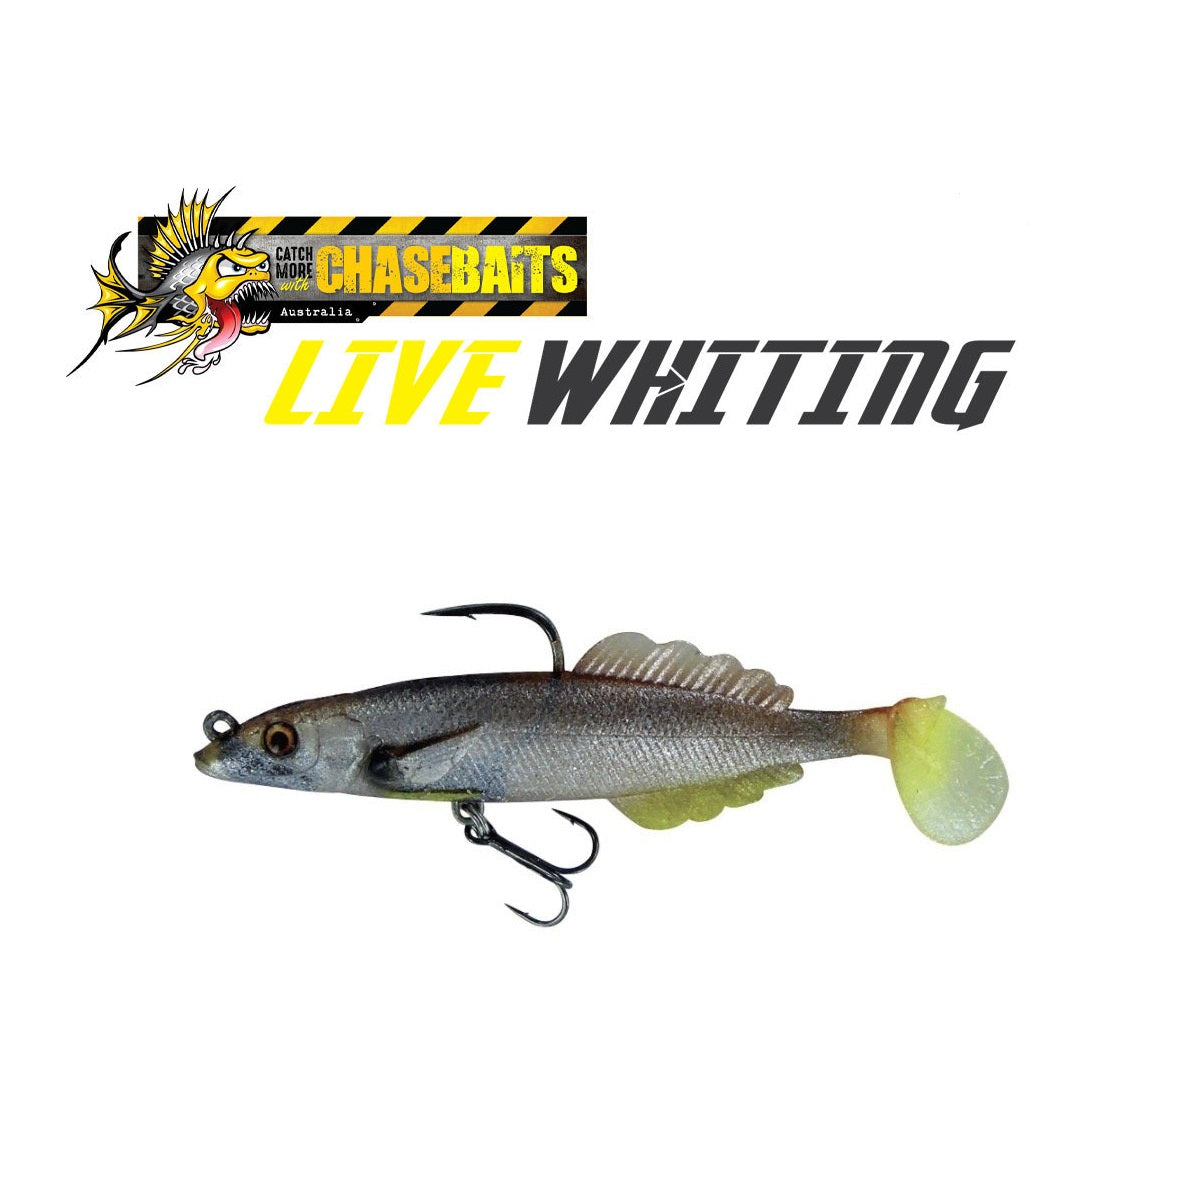 Chasebaits Live Whiting Soft Plastic Lures